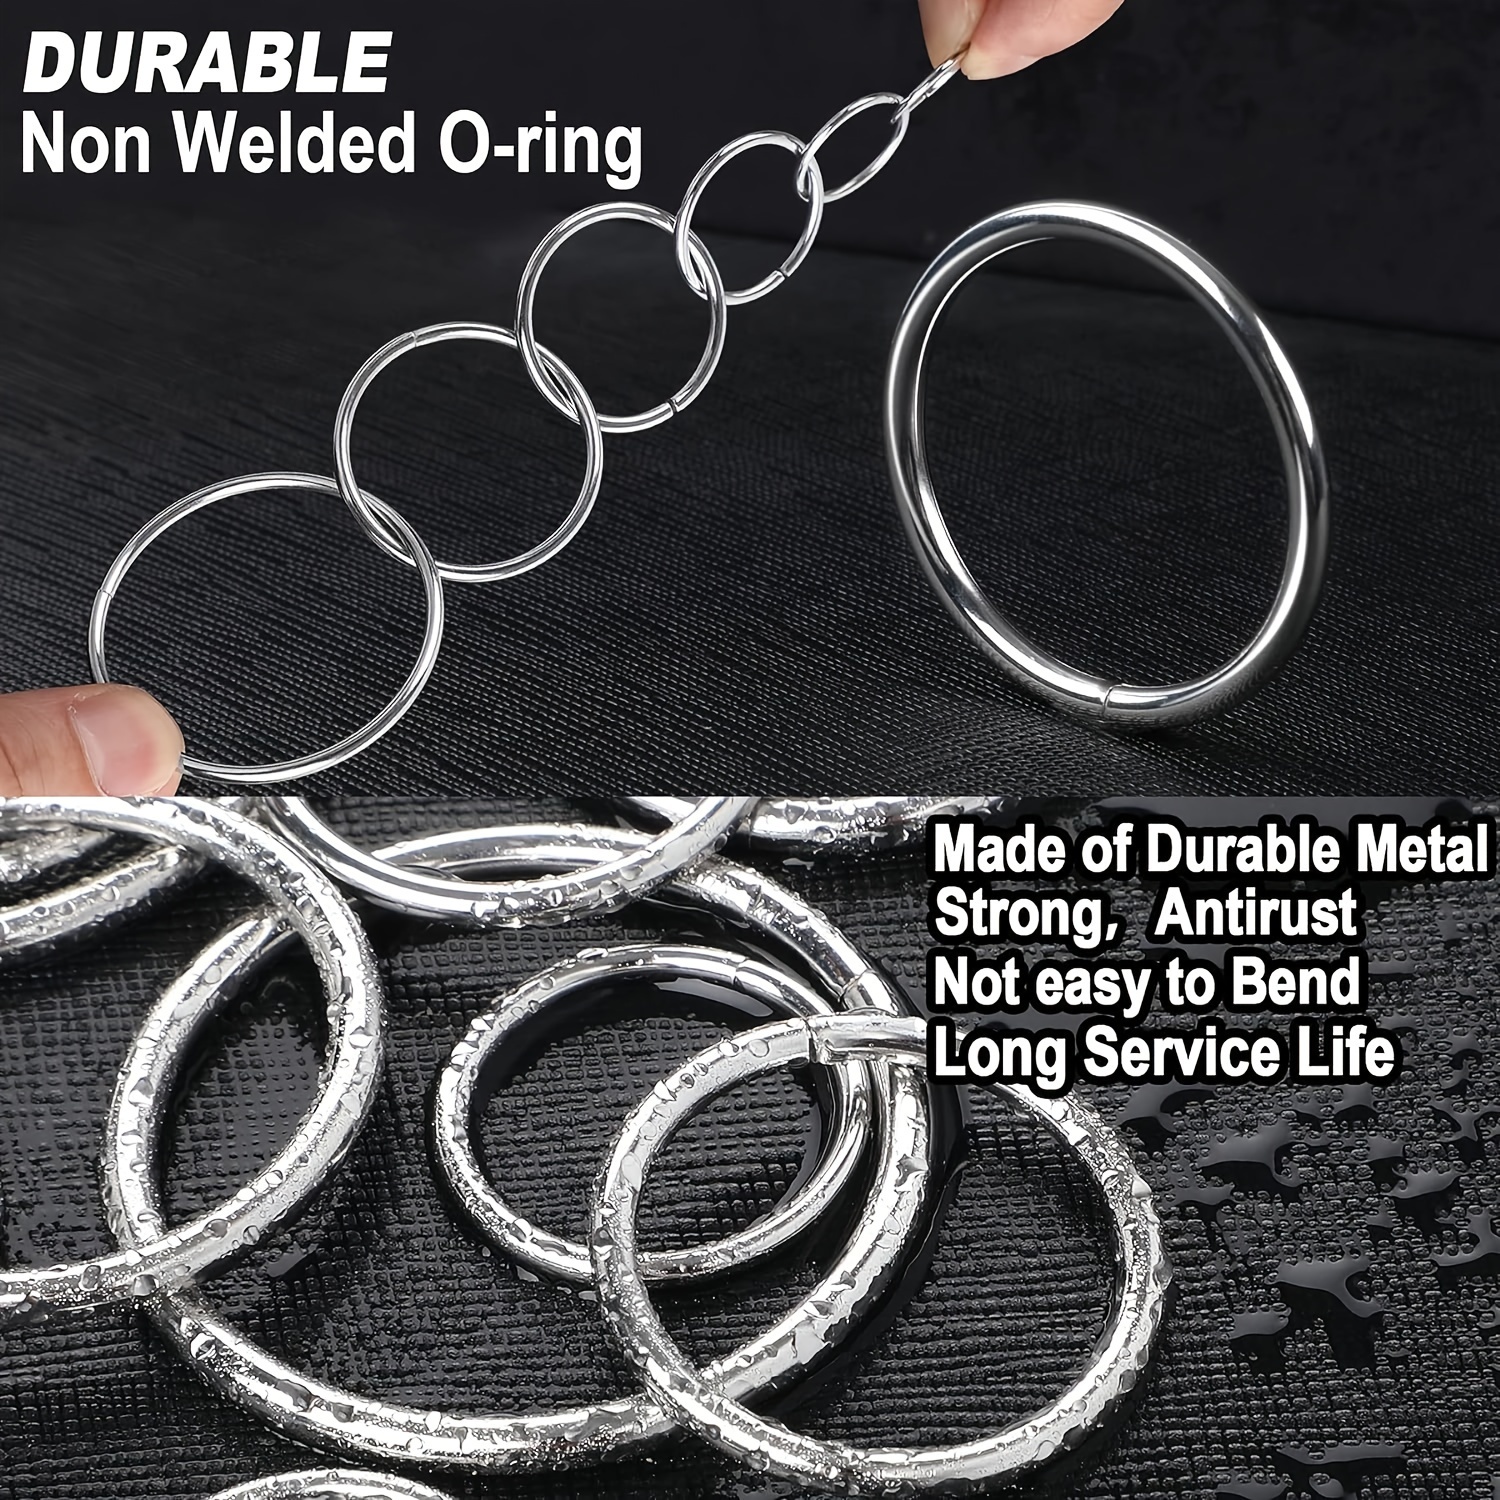 Silver Metal Rings for Crafts,Macrame Rings,Craft Rings,O Rings Metal,Metal  Circle,Small Metal O Rings Heavy Duty Round Ring for Bags Belts Dog